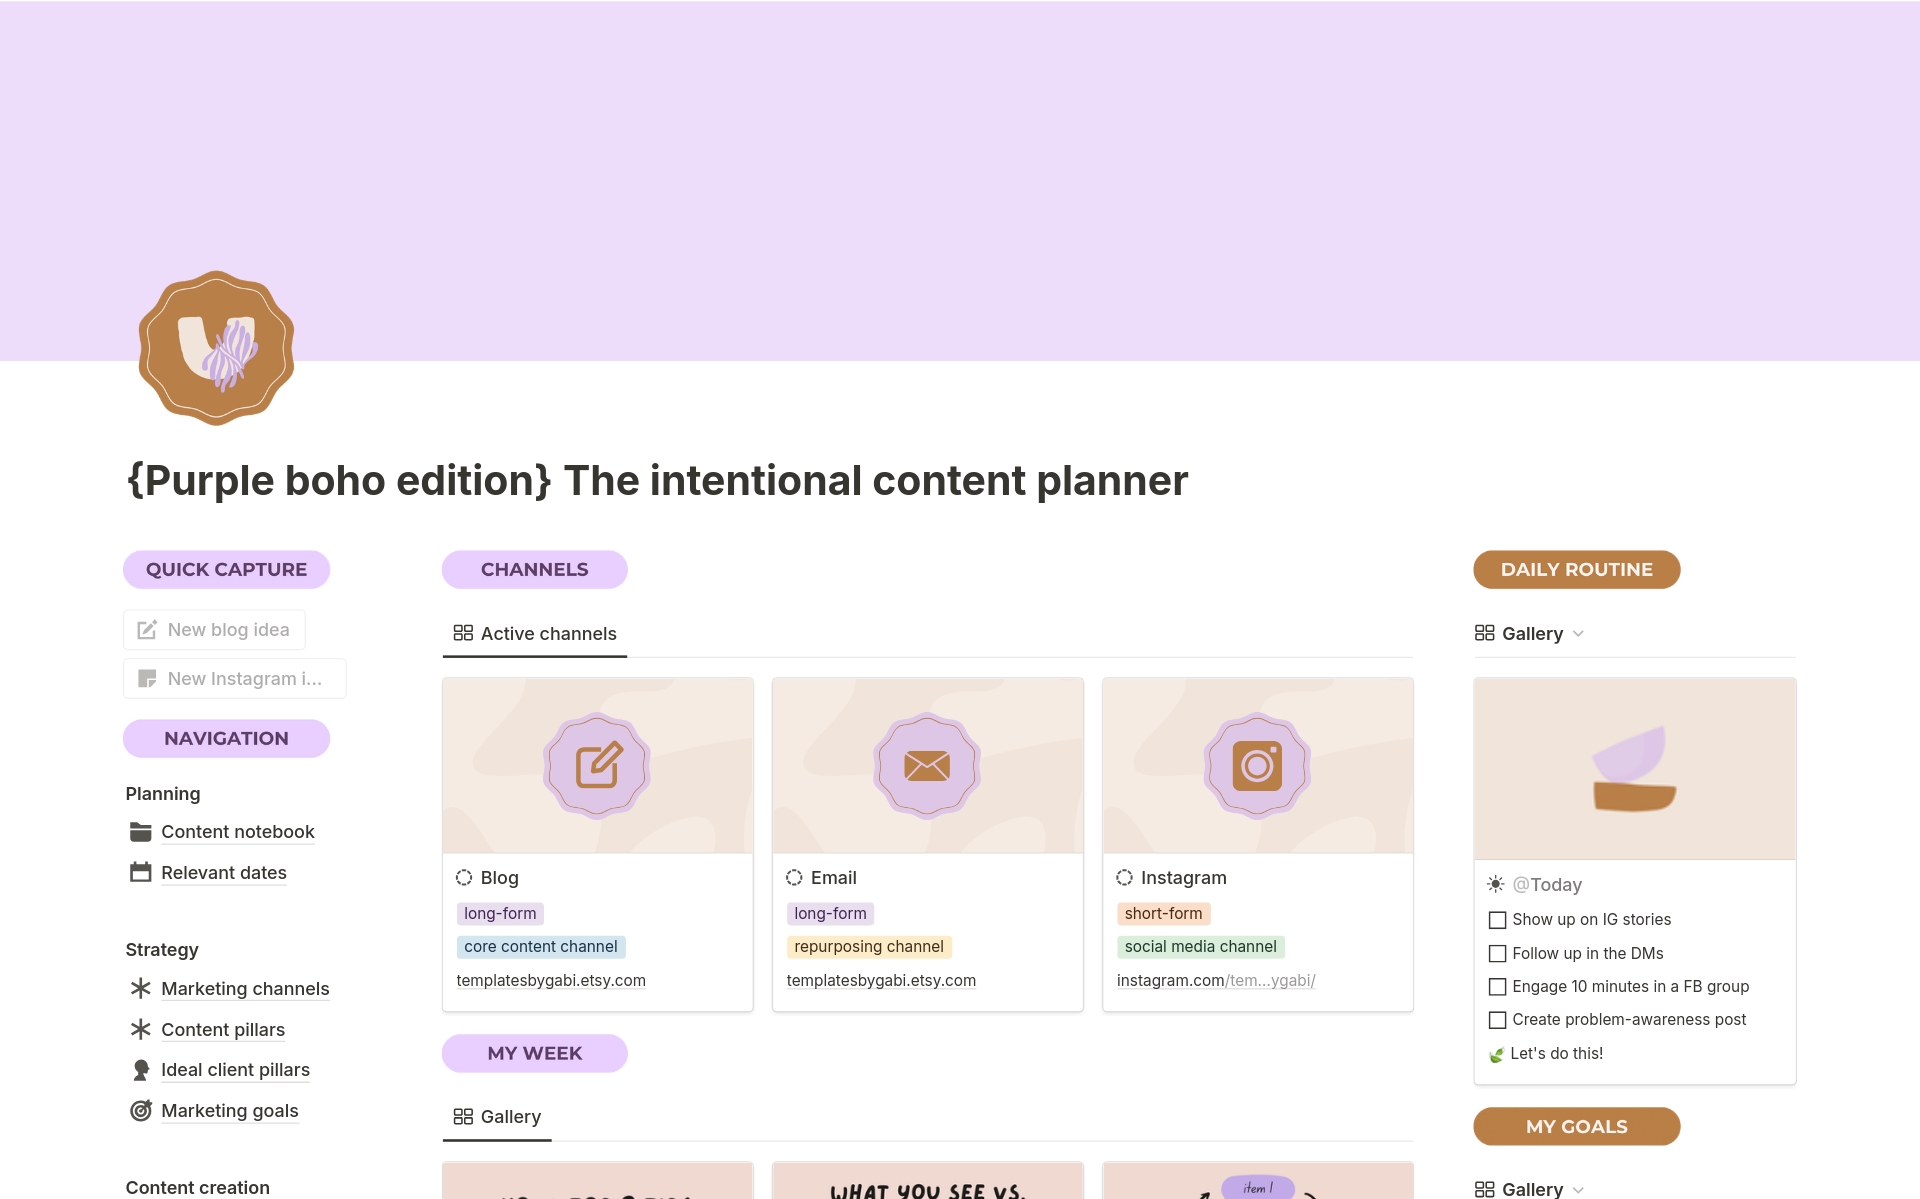 This Notion template is your all-in-one content planner, designed to help your streamline your content creation process - plan, create and manage all of your content in one place and keep your organized and productive